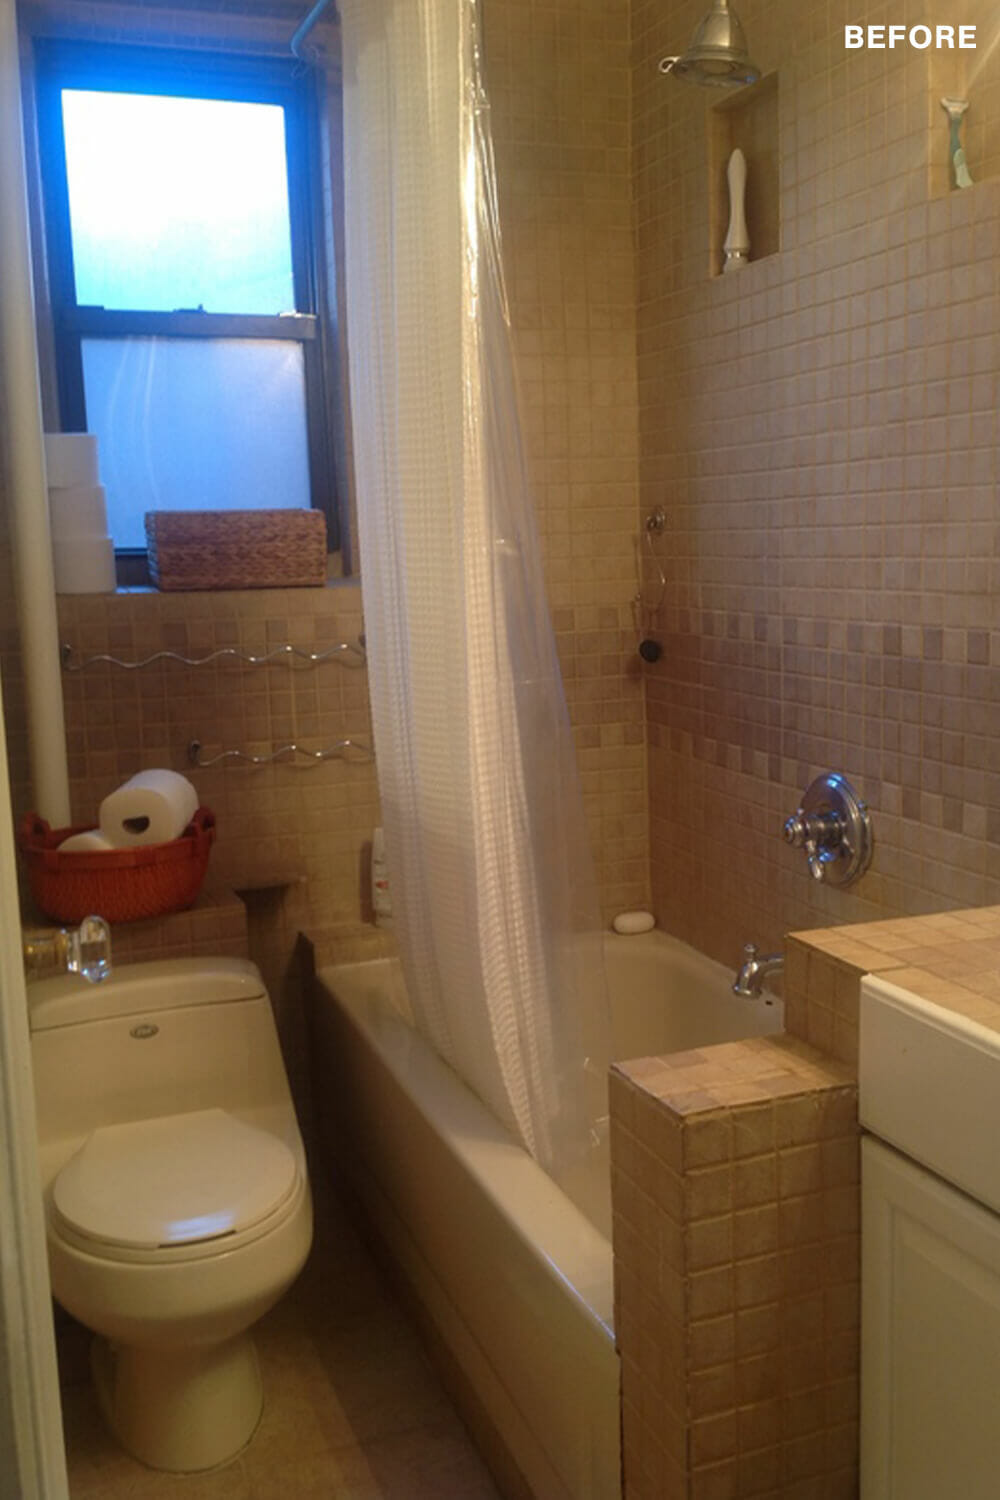 compact bathroom with brown tiles on walls and floor and toilet and bathtub before renovation